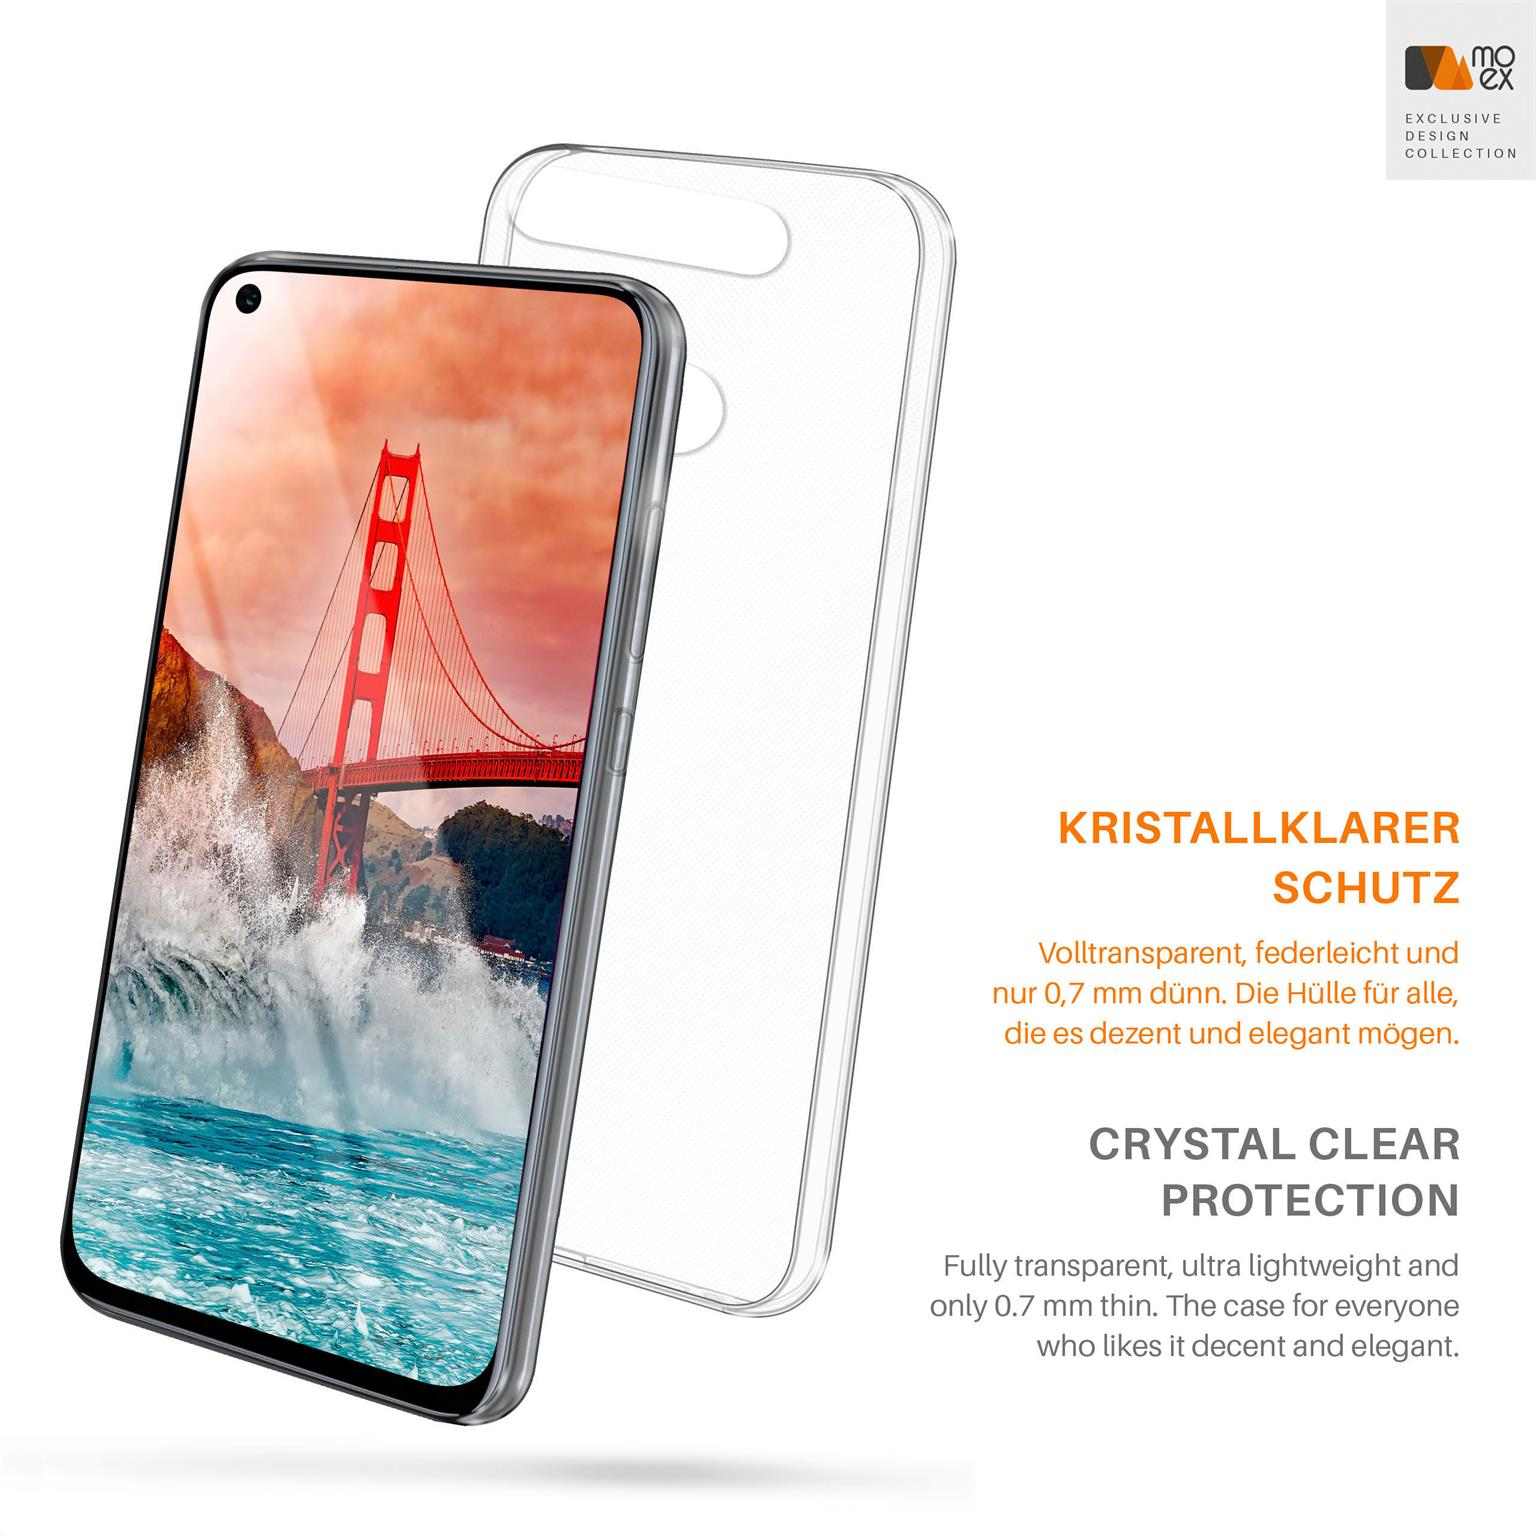 Backcover, 20, MOEX View Case, Huawei, Aero Crystal-Clear Honor